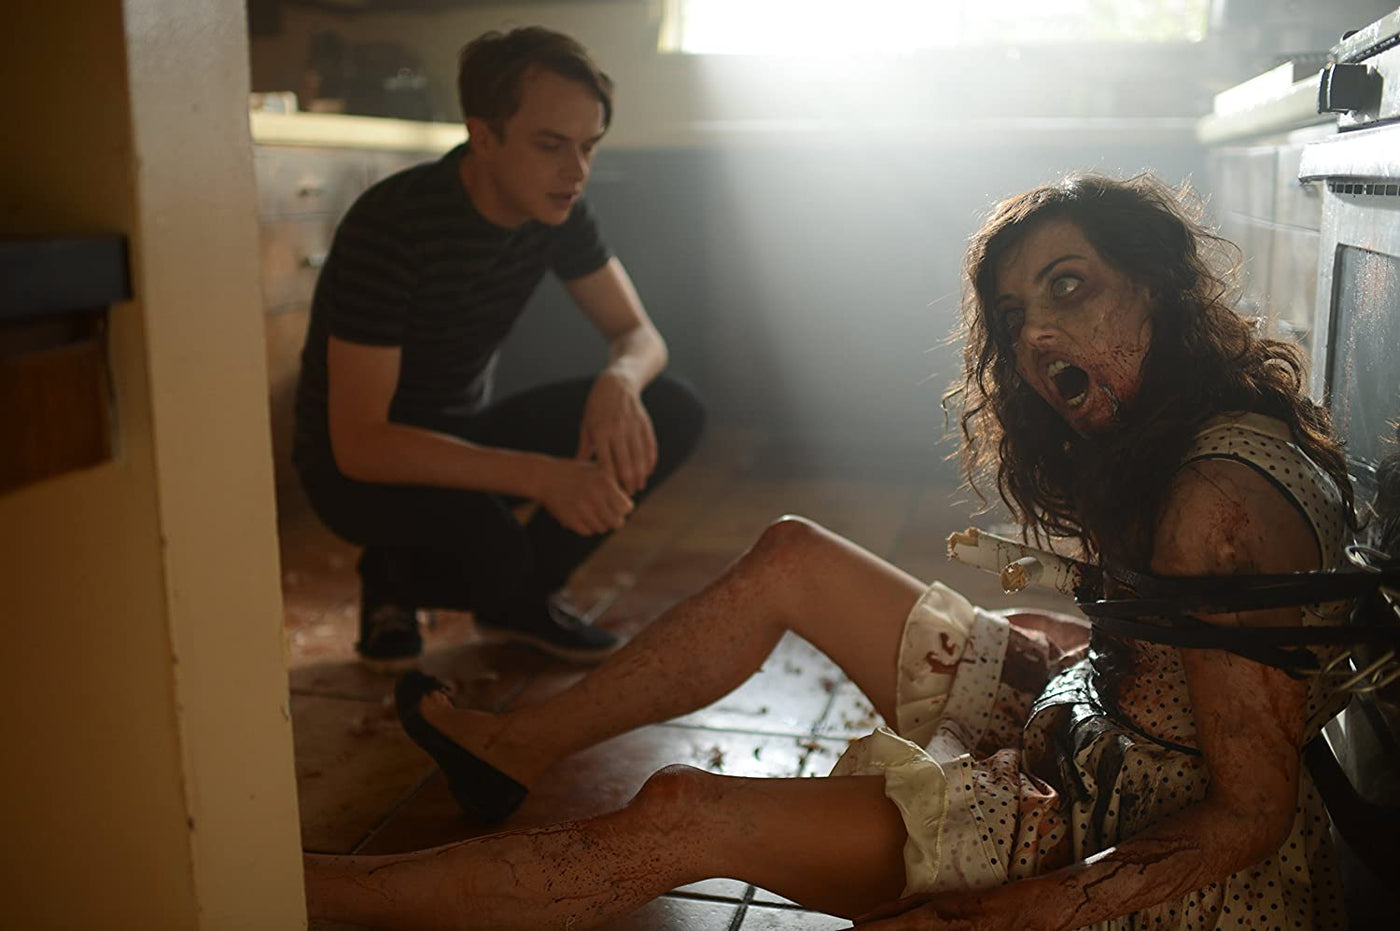 Life After Beth (DVD)